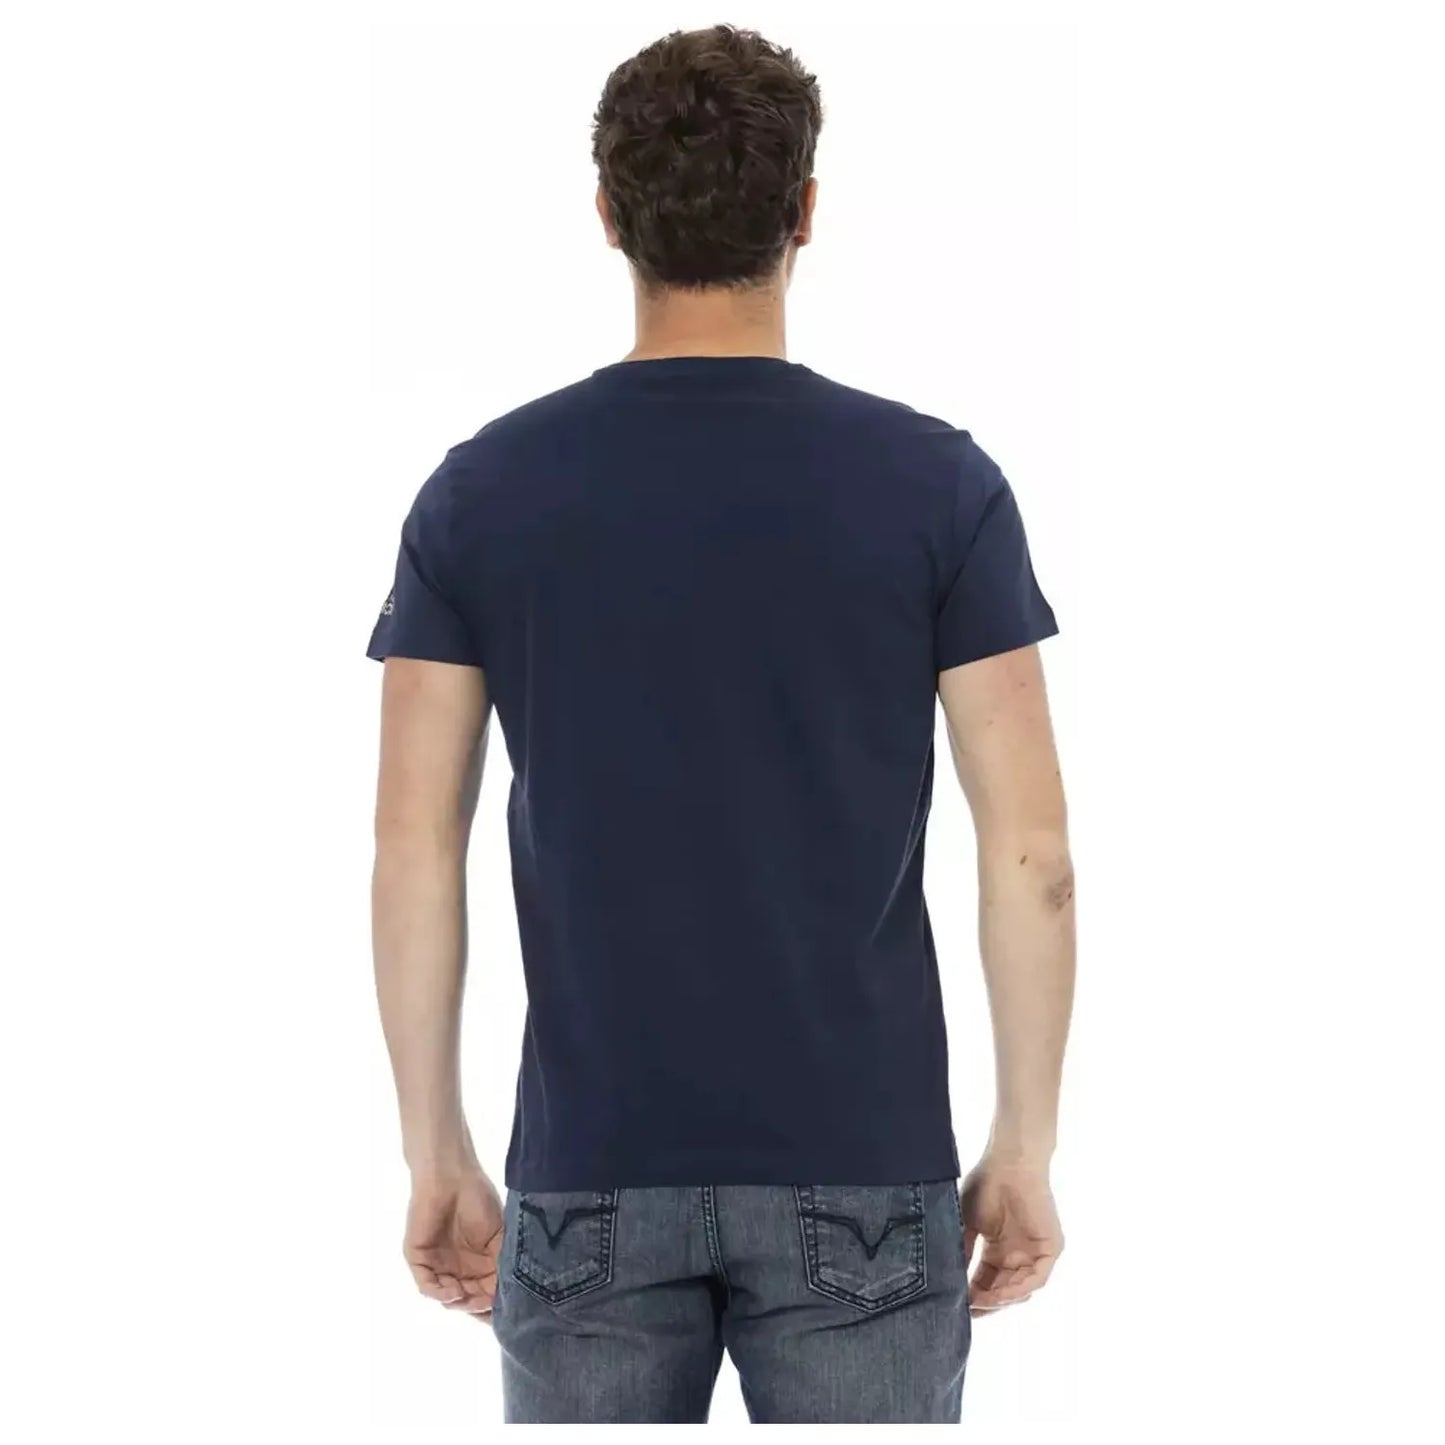 Trussardi Action Chic Blue Printed Tee with Short Sleeves blue-cotton-t-shirt-19 product-22817-725782951-22-5faa144a-53e.webp